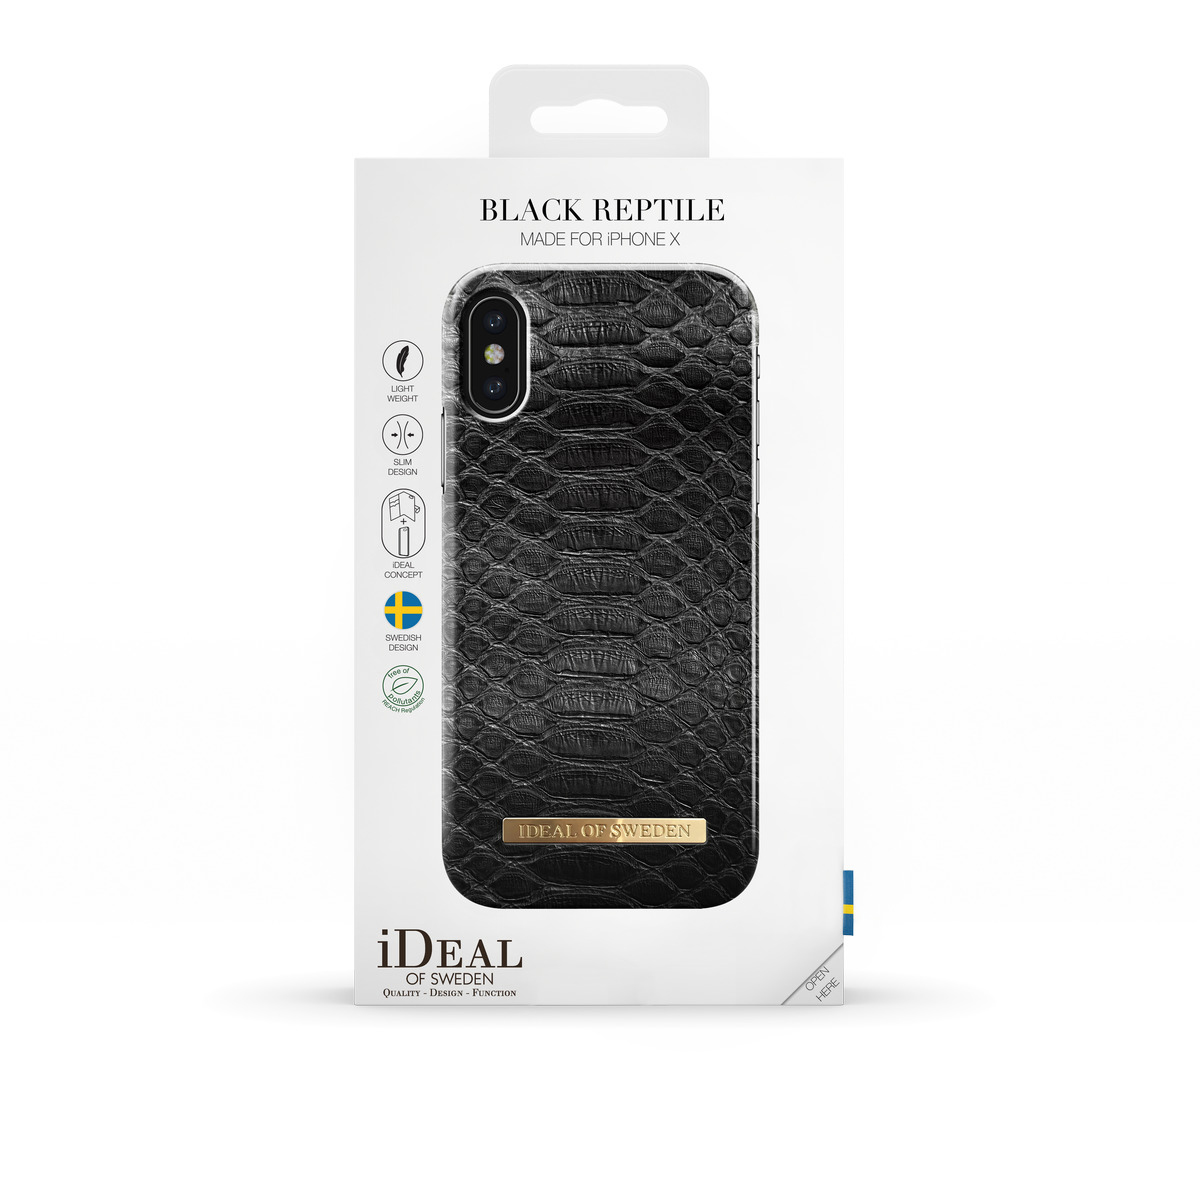 IDEAL OF Reptile Fashion, Backcover, Black X, Apple, SWEDEN iPhone